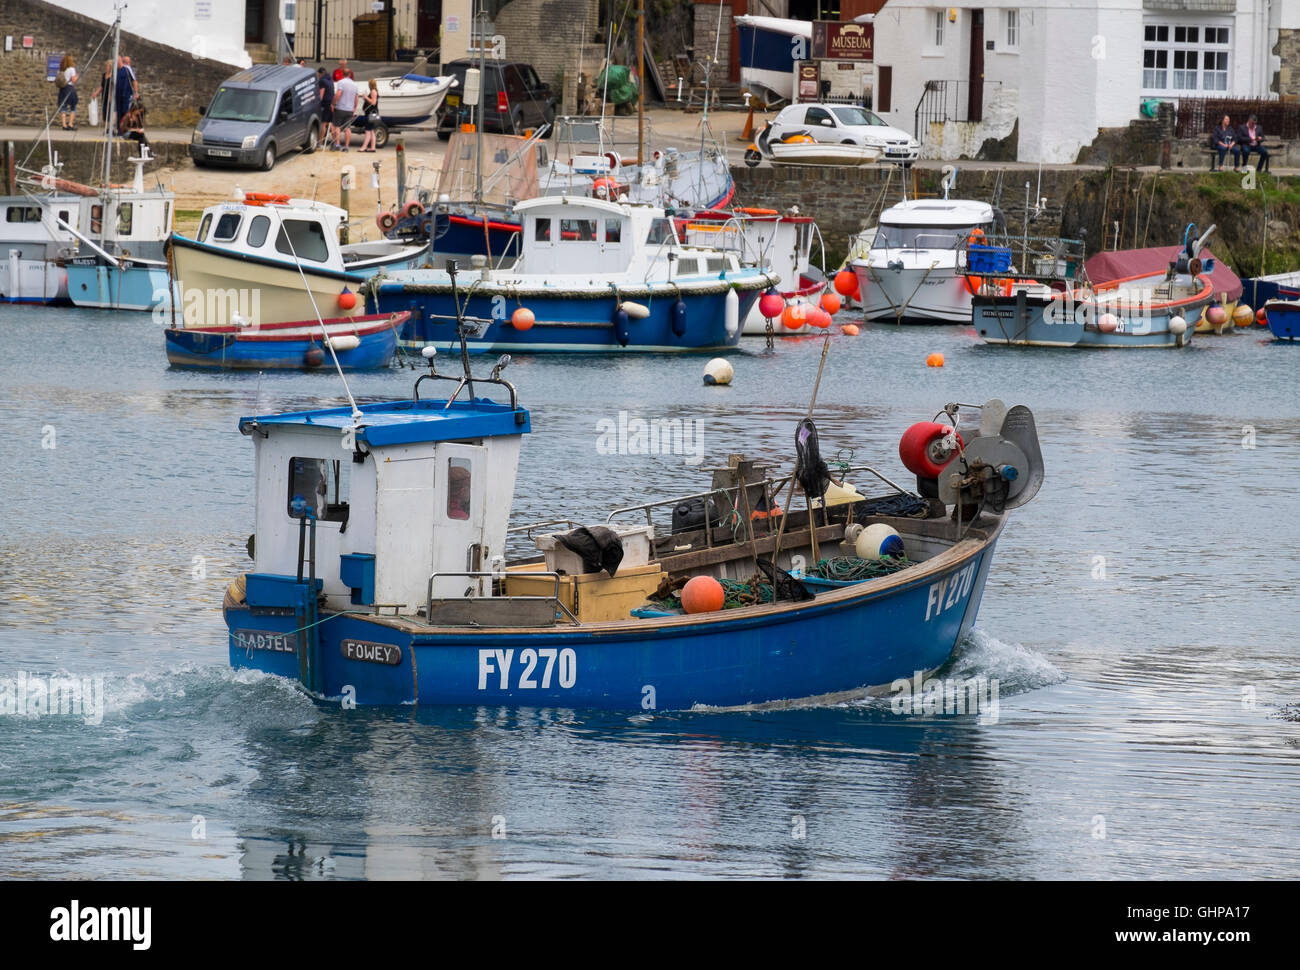 A fishing boat makes its way out of Mevagissey harbour, Cornwall, England, UK Stock Photo